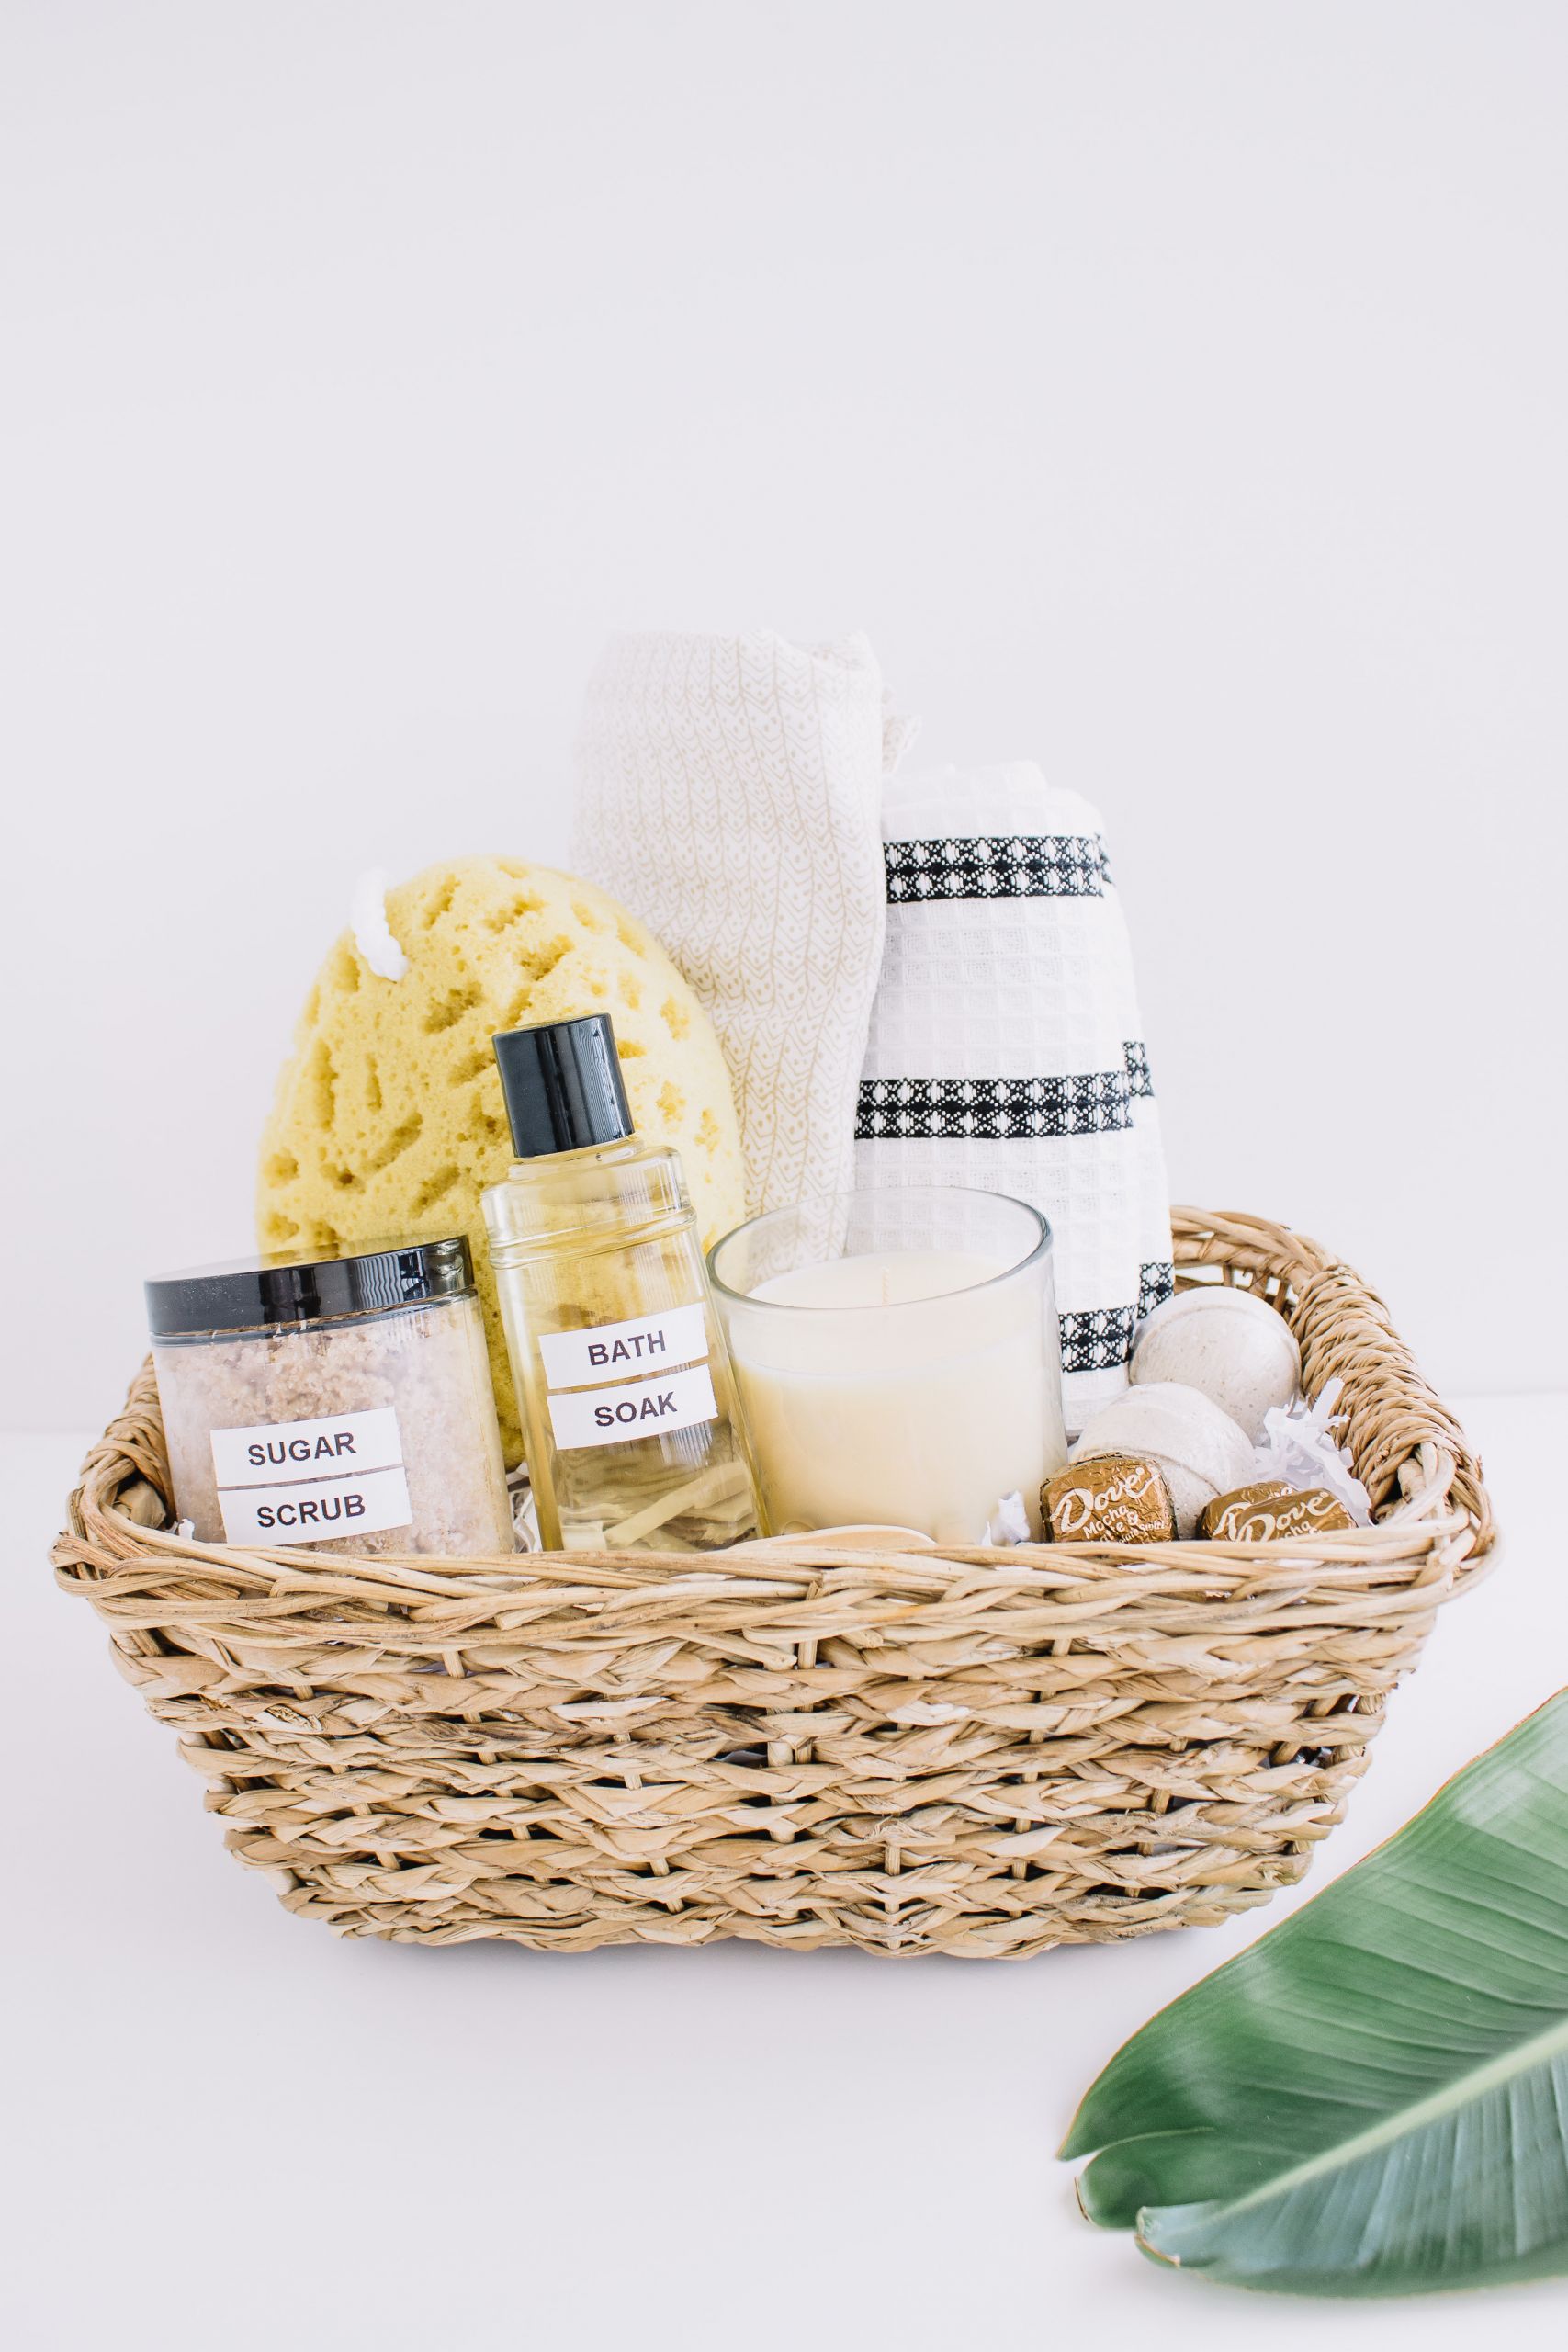 DIY Spa Kits
 The Perfect DIY Spa Kit to Unwind and Relax Hot Beauty Health